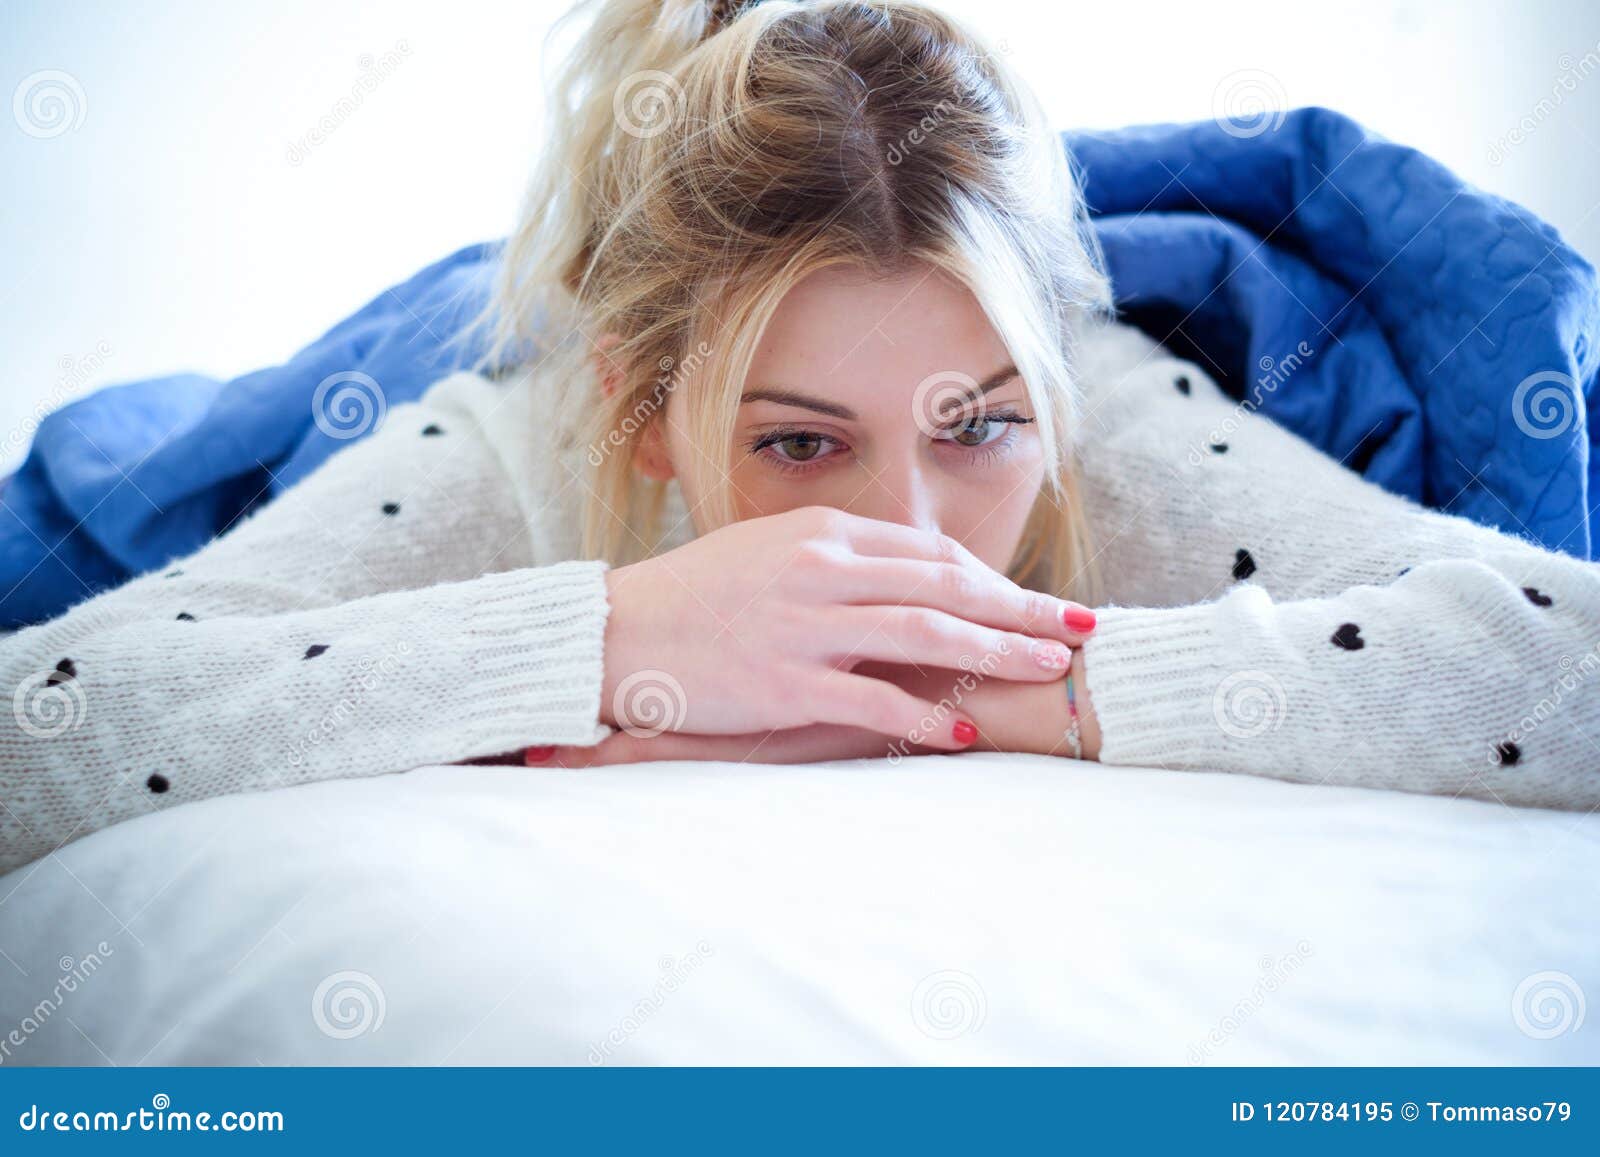 Lonely Sad Girl Lying on Bed in a Bedroom Stock Image - Image of ...